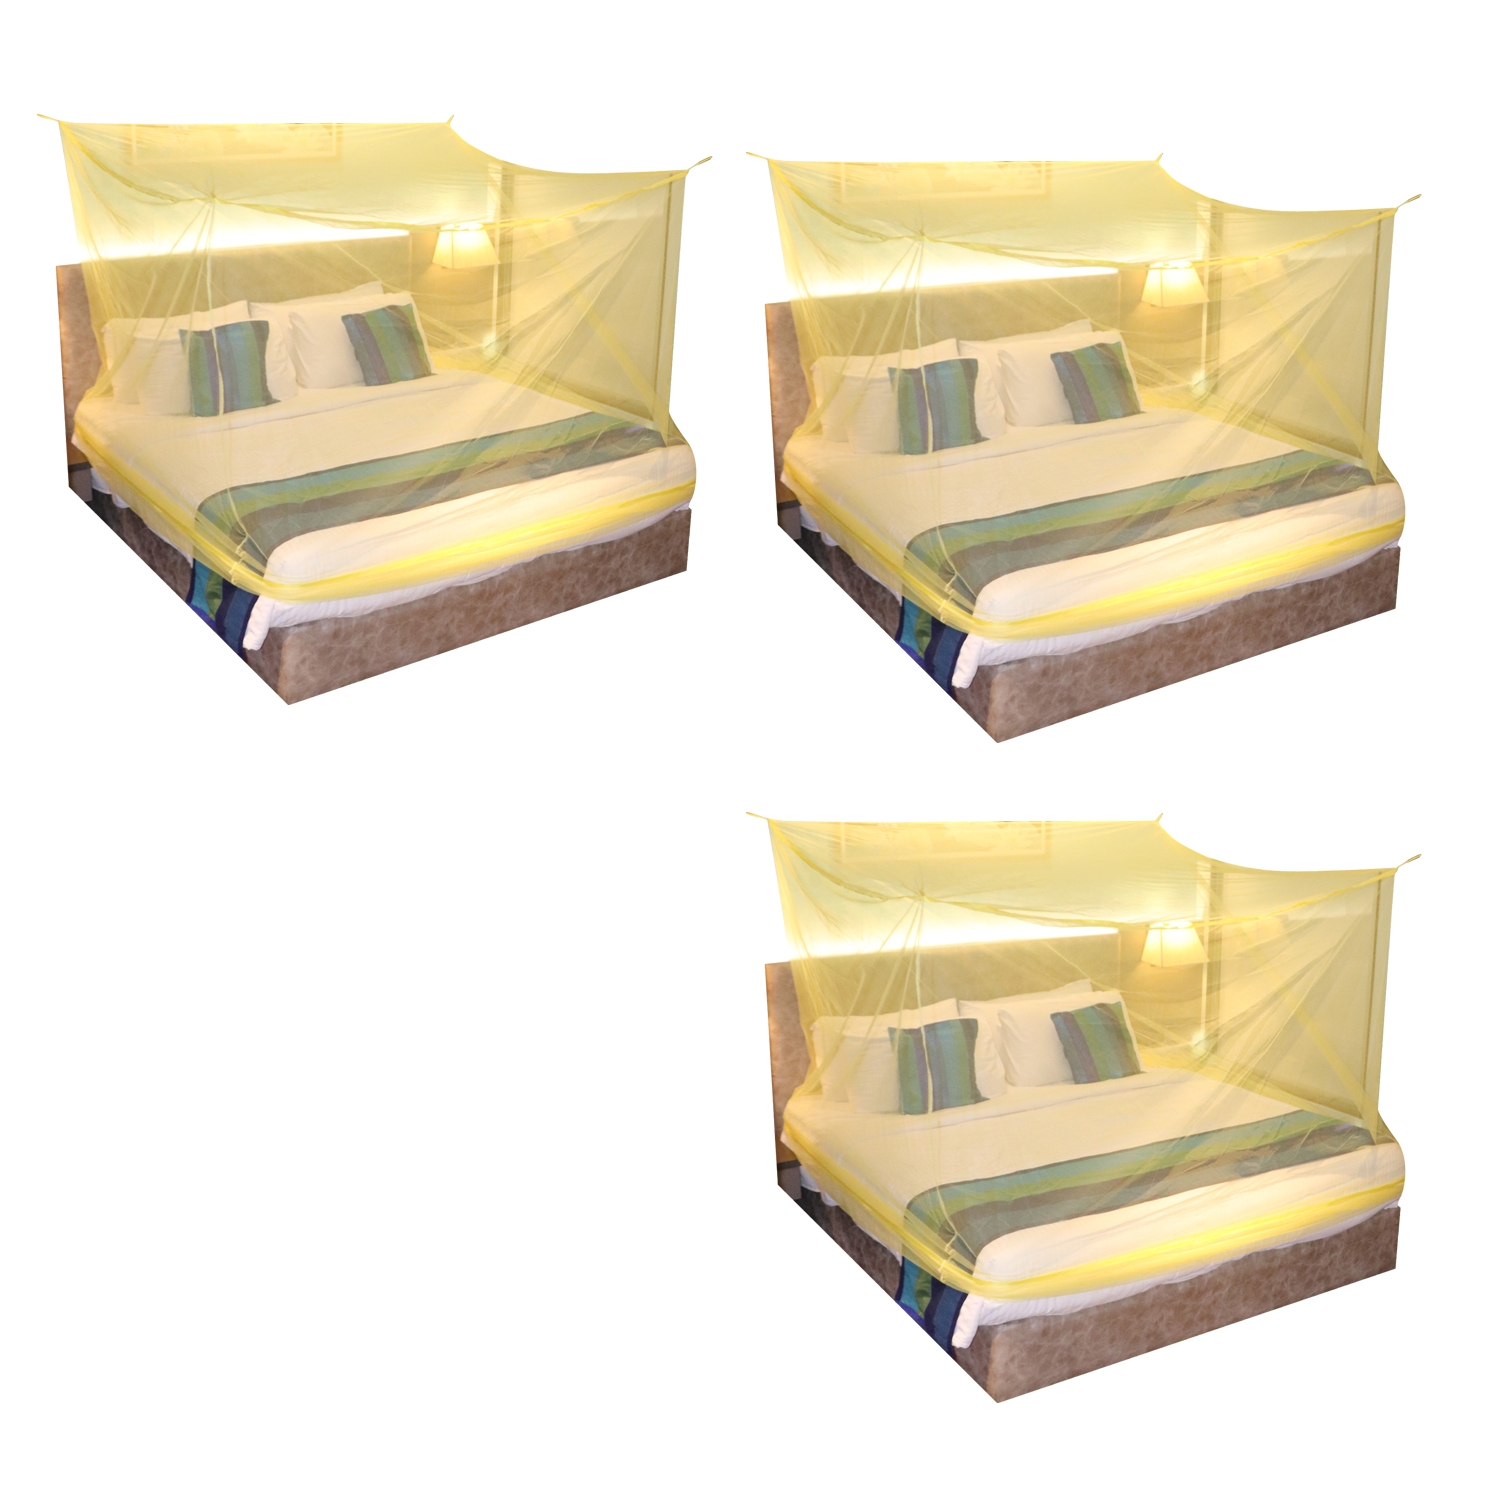 SILVER SHINE | Mosquito Net for Double Bed, King-Size, Square Hanging Foldable Polyester Net YellowPack of 3 3